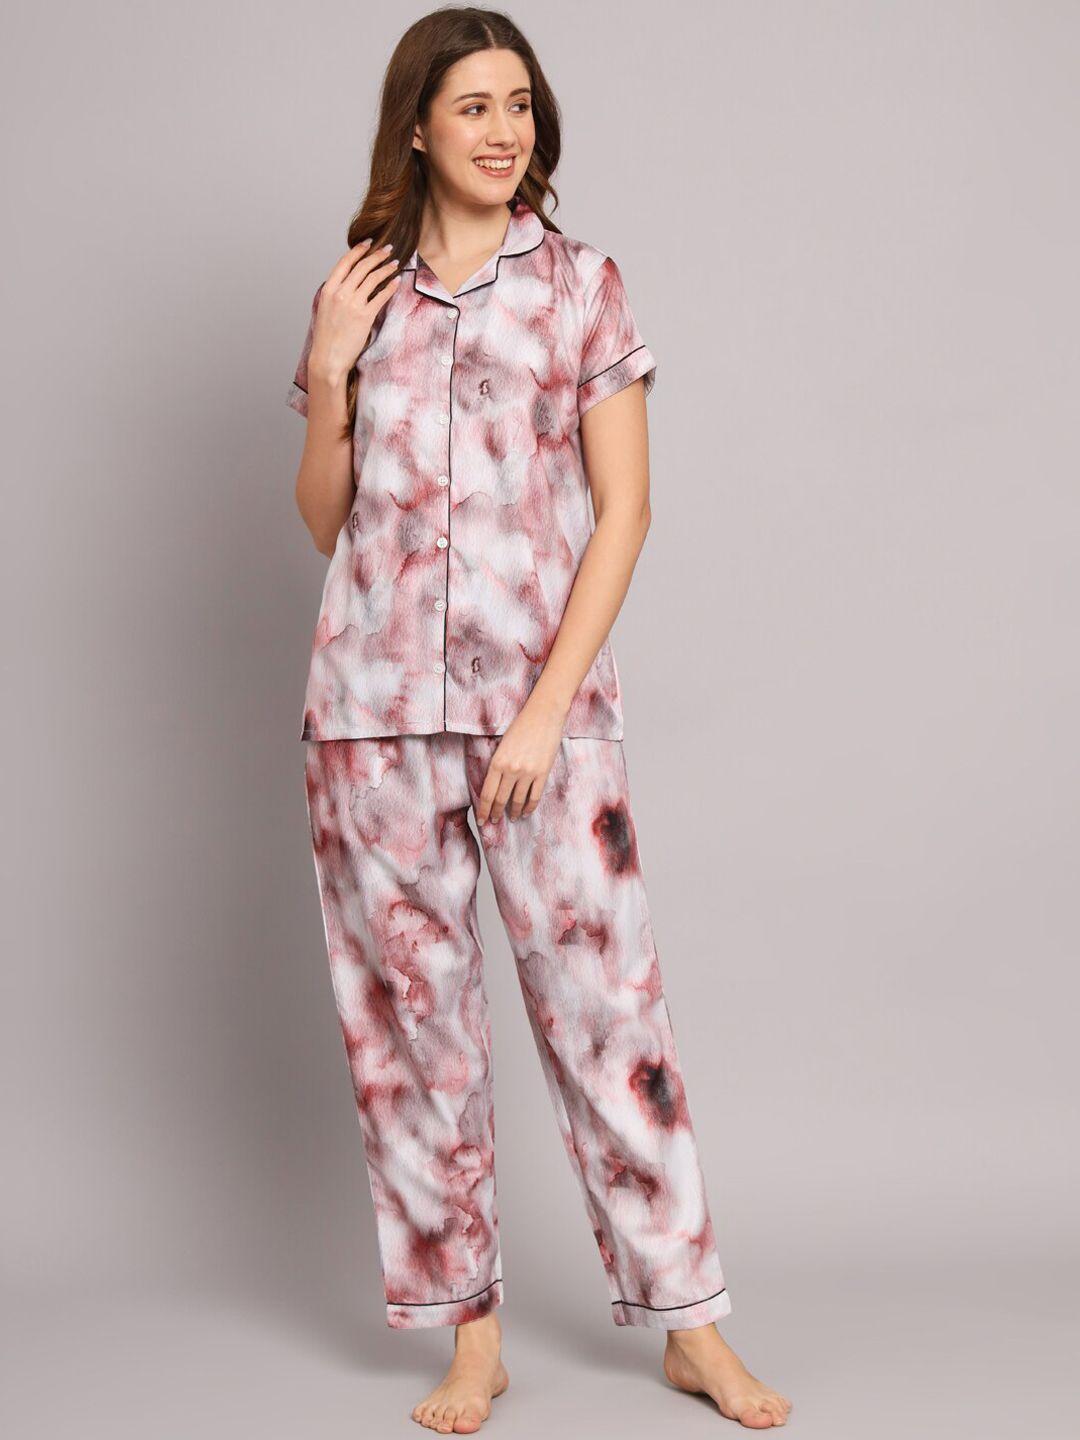 sephani abstract printed night suit